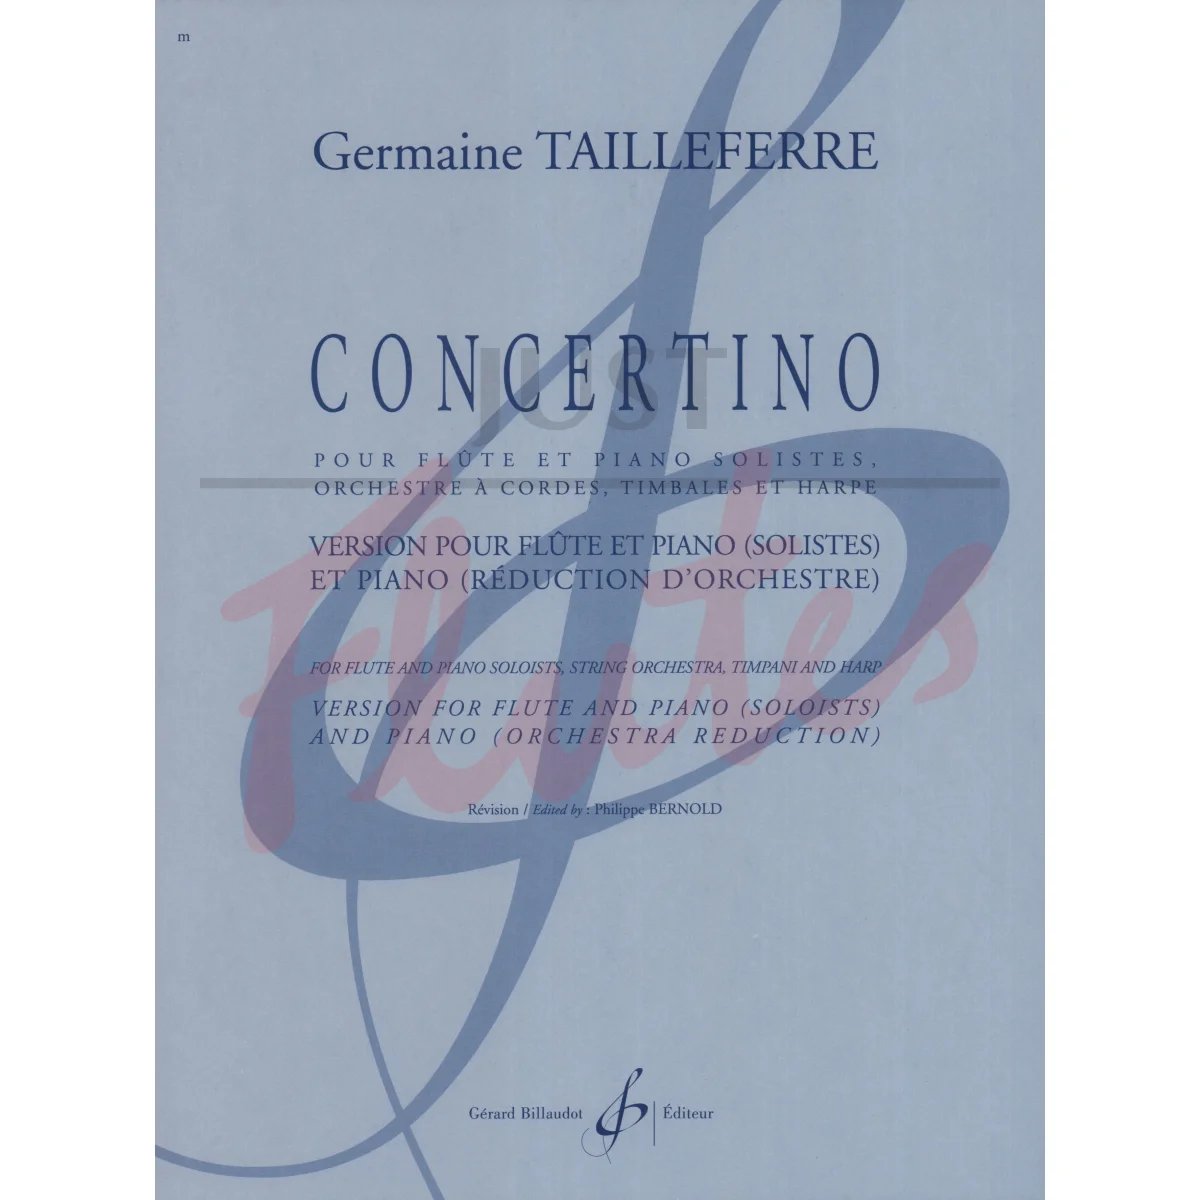 Concertino for Flute and Piano (Soloists), with Piano Accompaniment